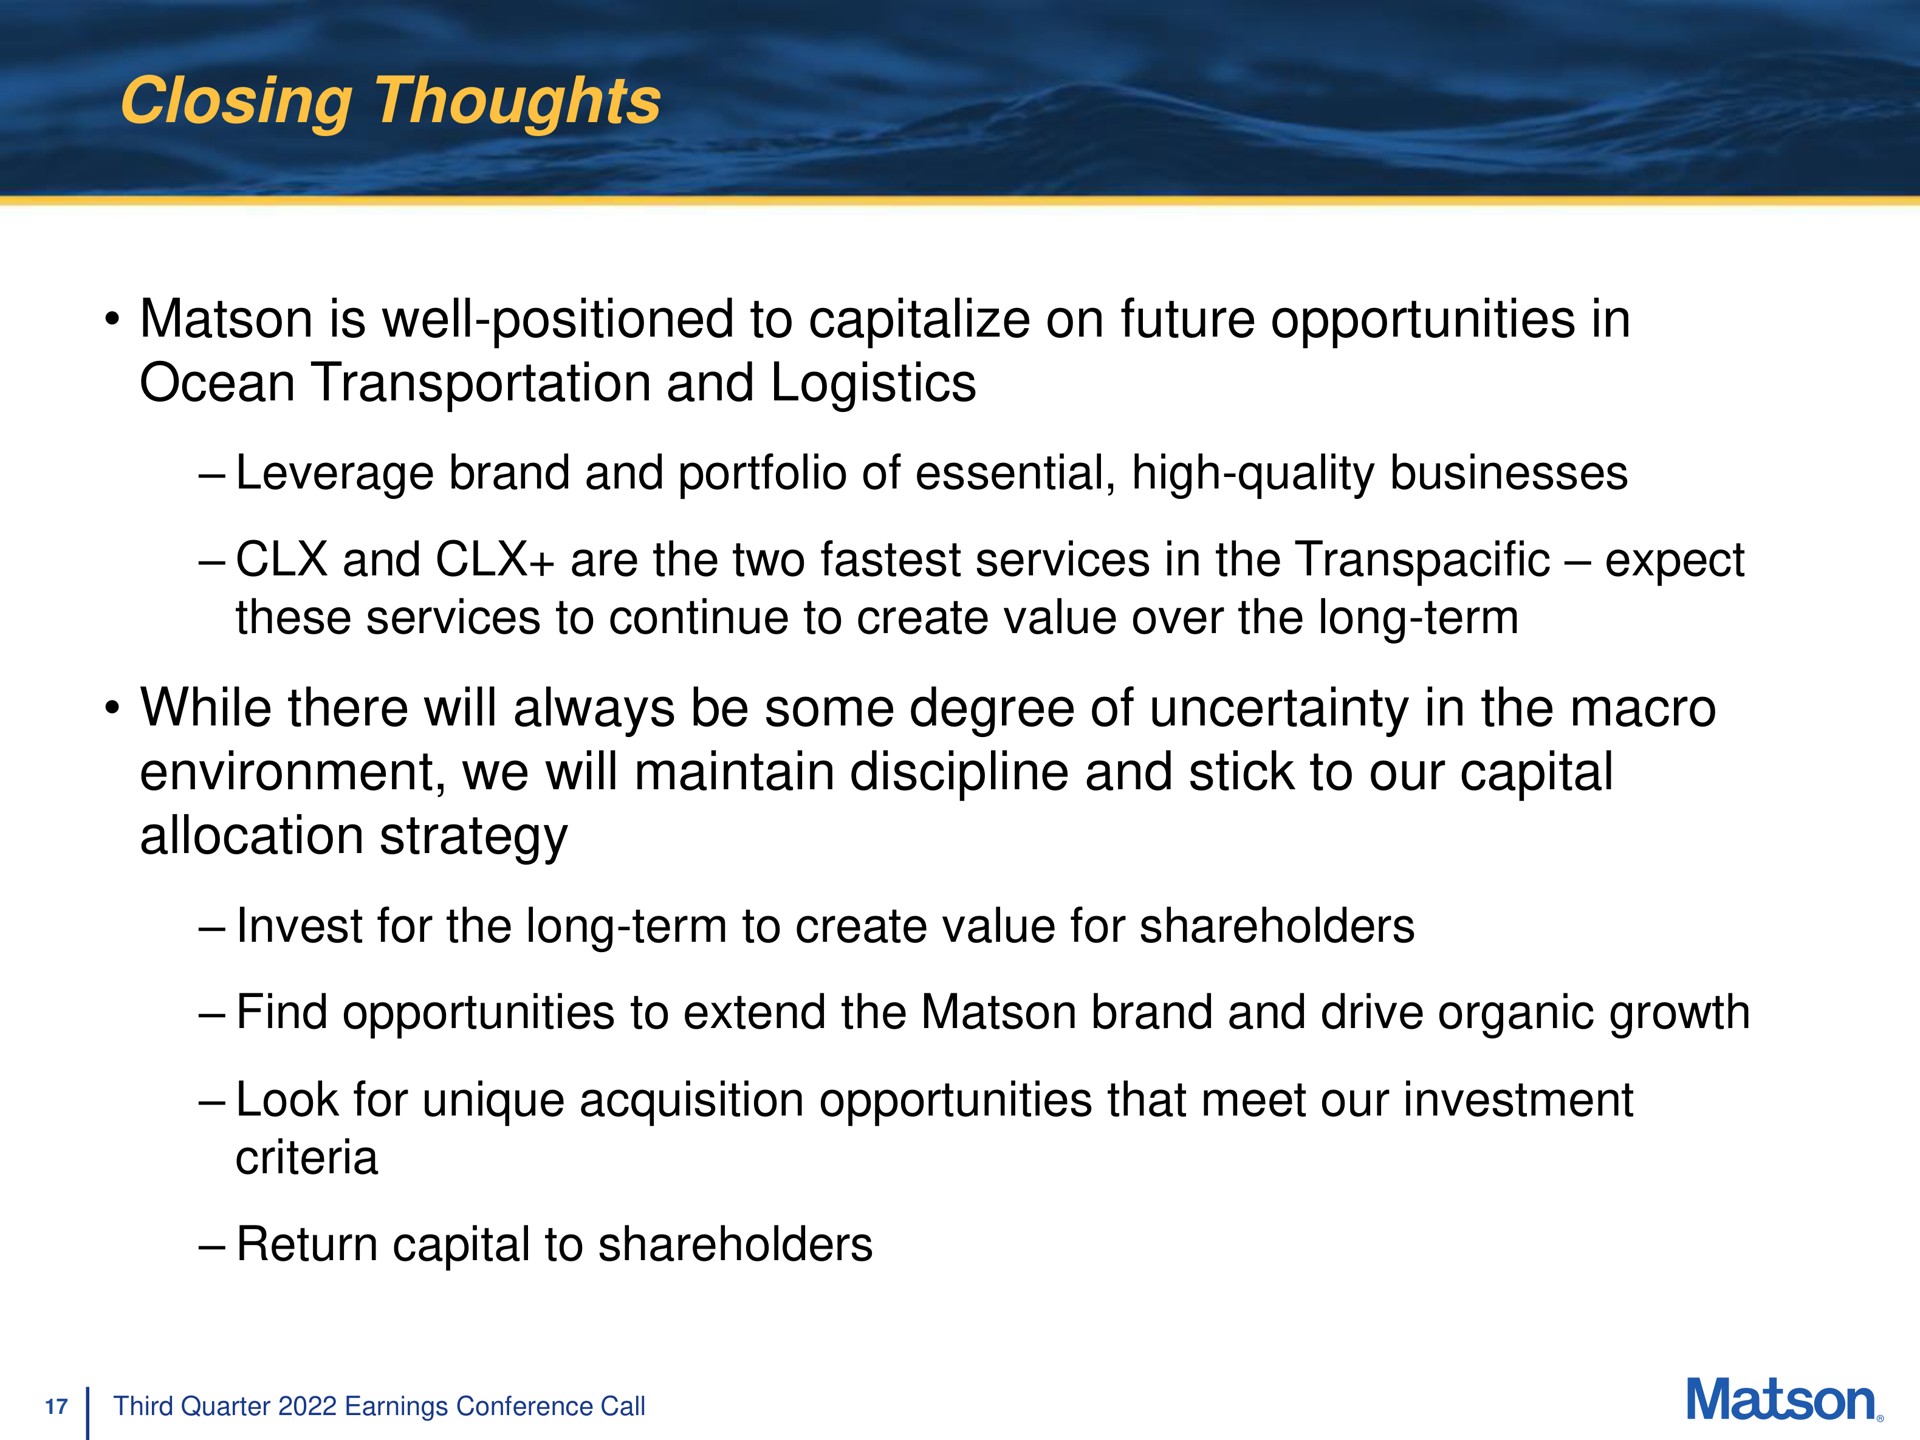 closing thoughts is well positioned to capitalize on future opportunities in ocean transportation and logistics leverage brand and portfolio of essential high quality businesses and are the two services in the transpacific expect these services to continue to create value over the long term while there will always be some degree of uncertainty in the macro environment we will maintain discipline and stick to our capital allocation strategy invest for the long term to create value for shareholders find opportunities to extend the brand and drive organic growth look for unique acquisition opportunities that meet our investment criteria return capital to shareholders | Matson